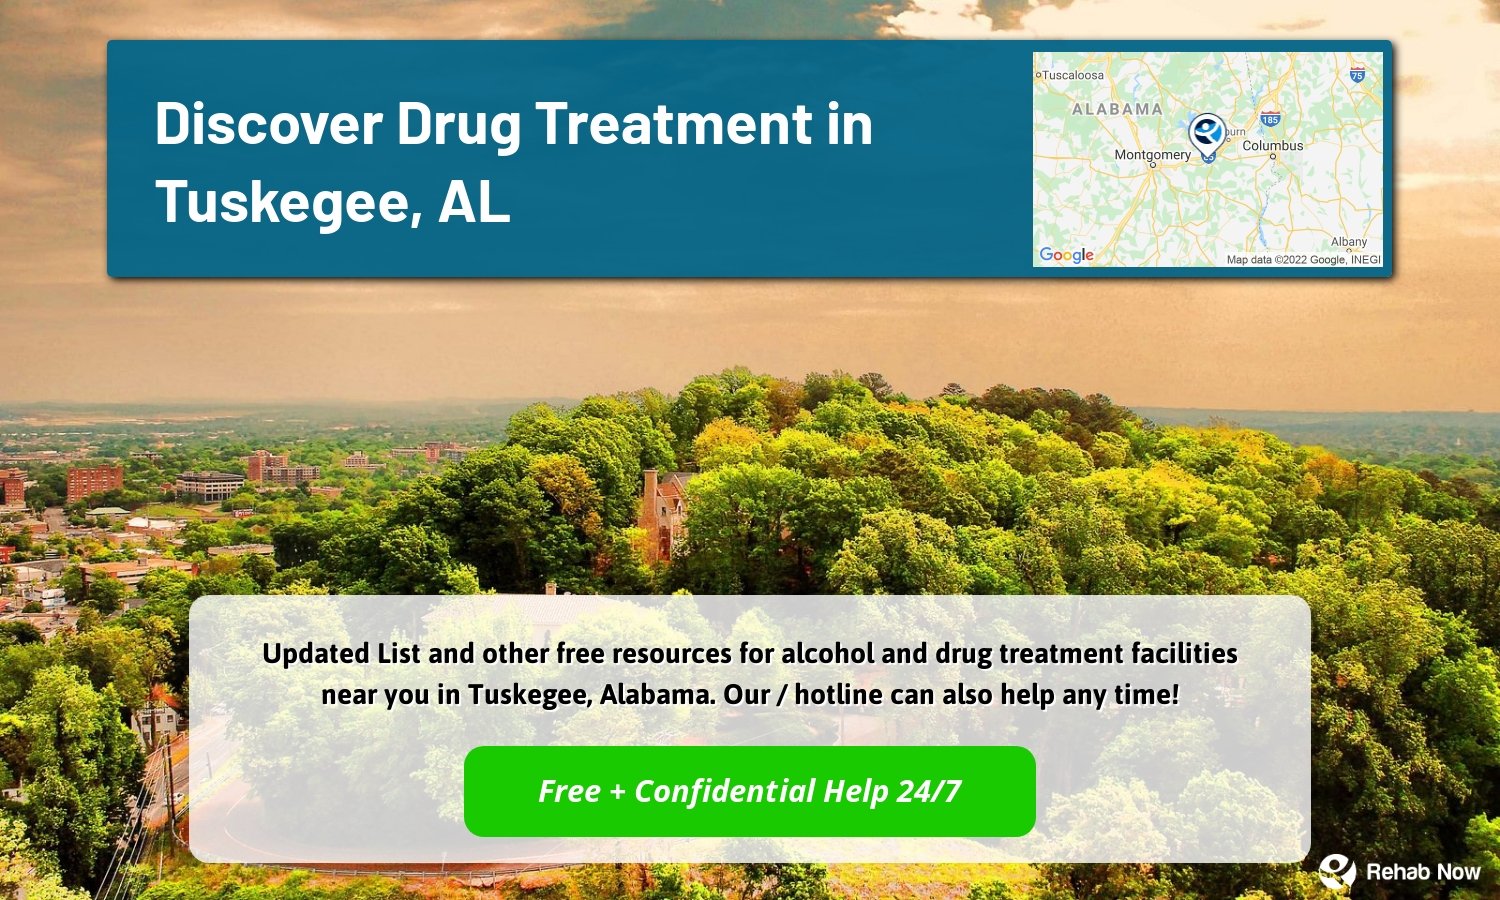  Updated List and other free resources for alcohol and drug treatment facilities near you in Tuskegee, Alabama. Our / hotline can also help any time!